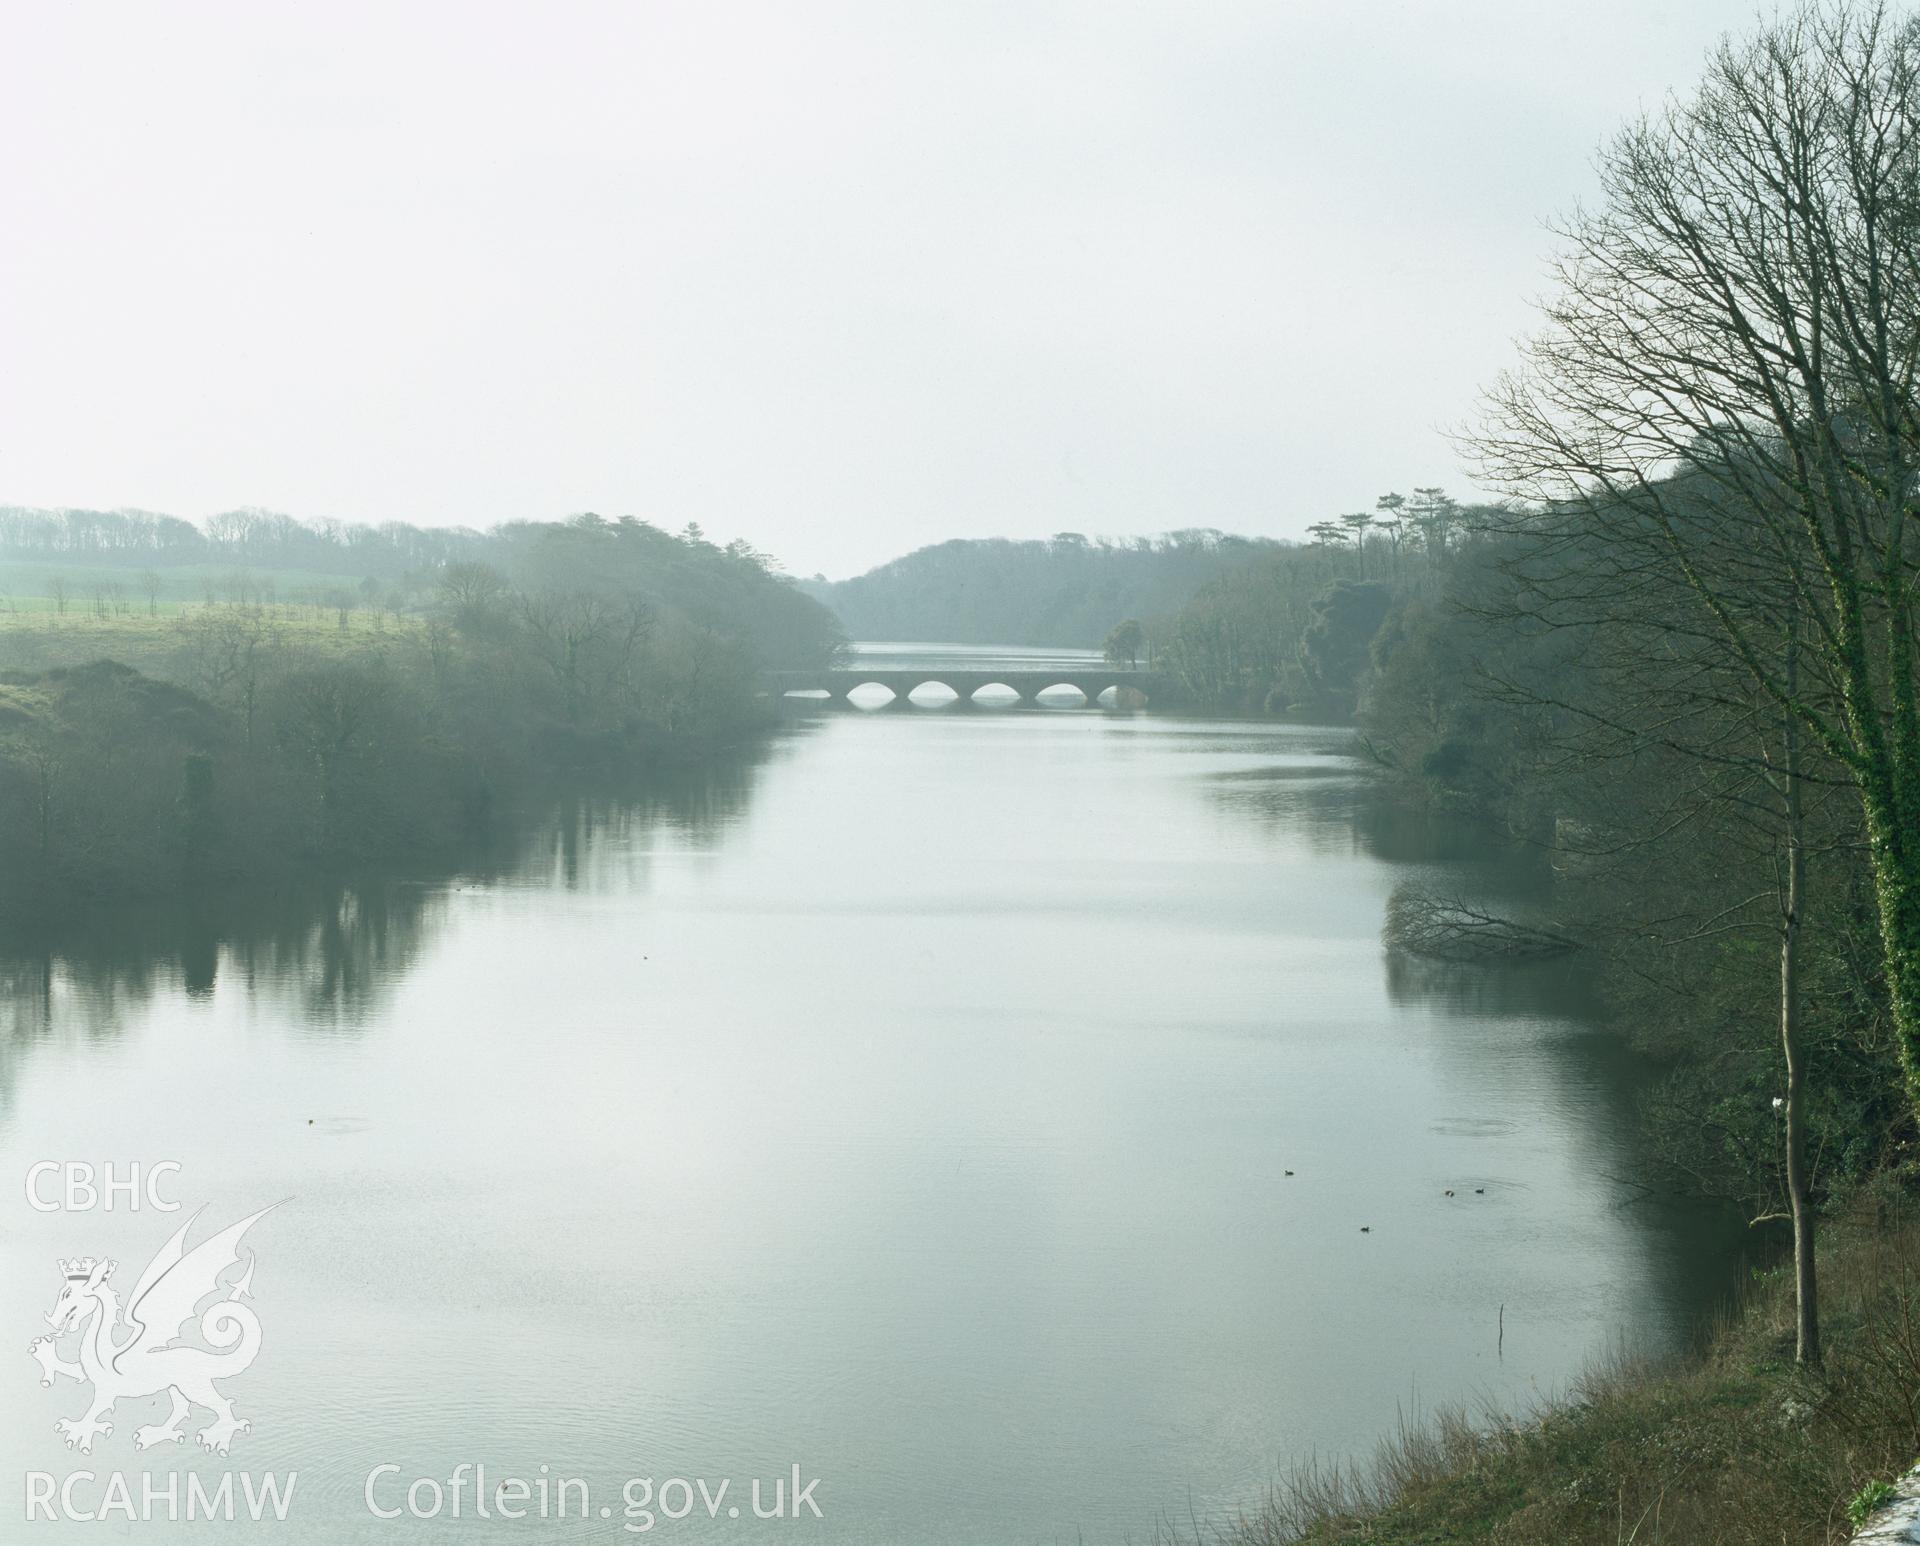 RCAHMW colour transparency showing view of eight arched bridge at Stackpole Court, taken by I.N. Wright, 2003.